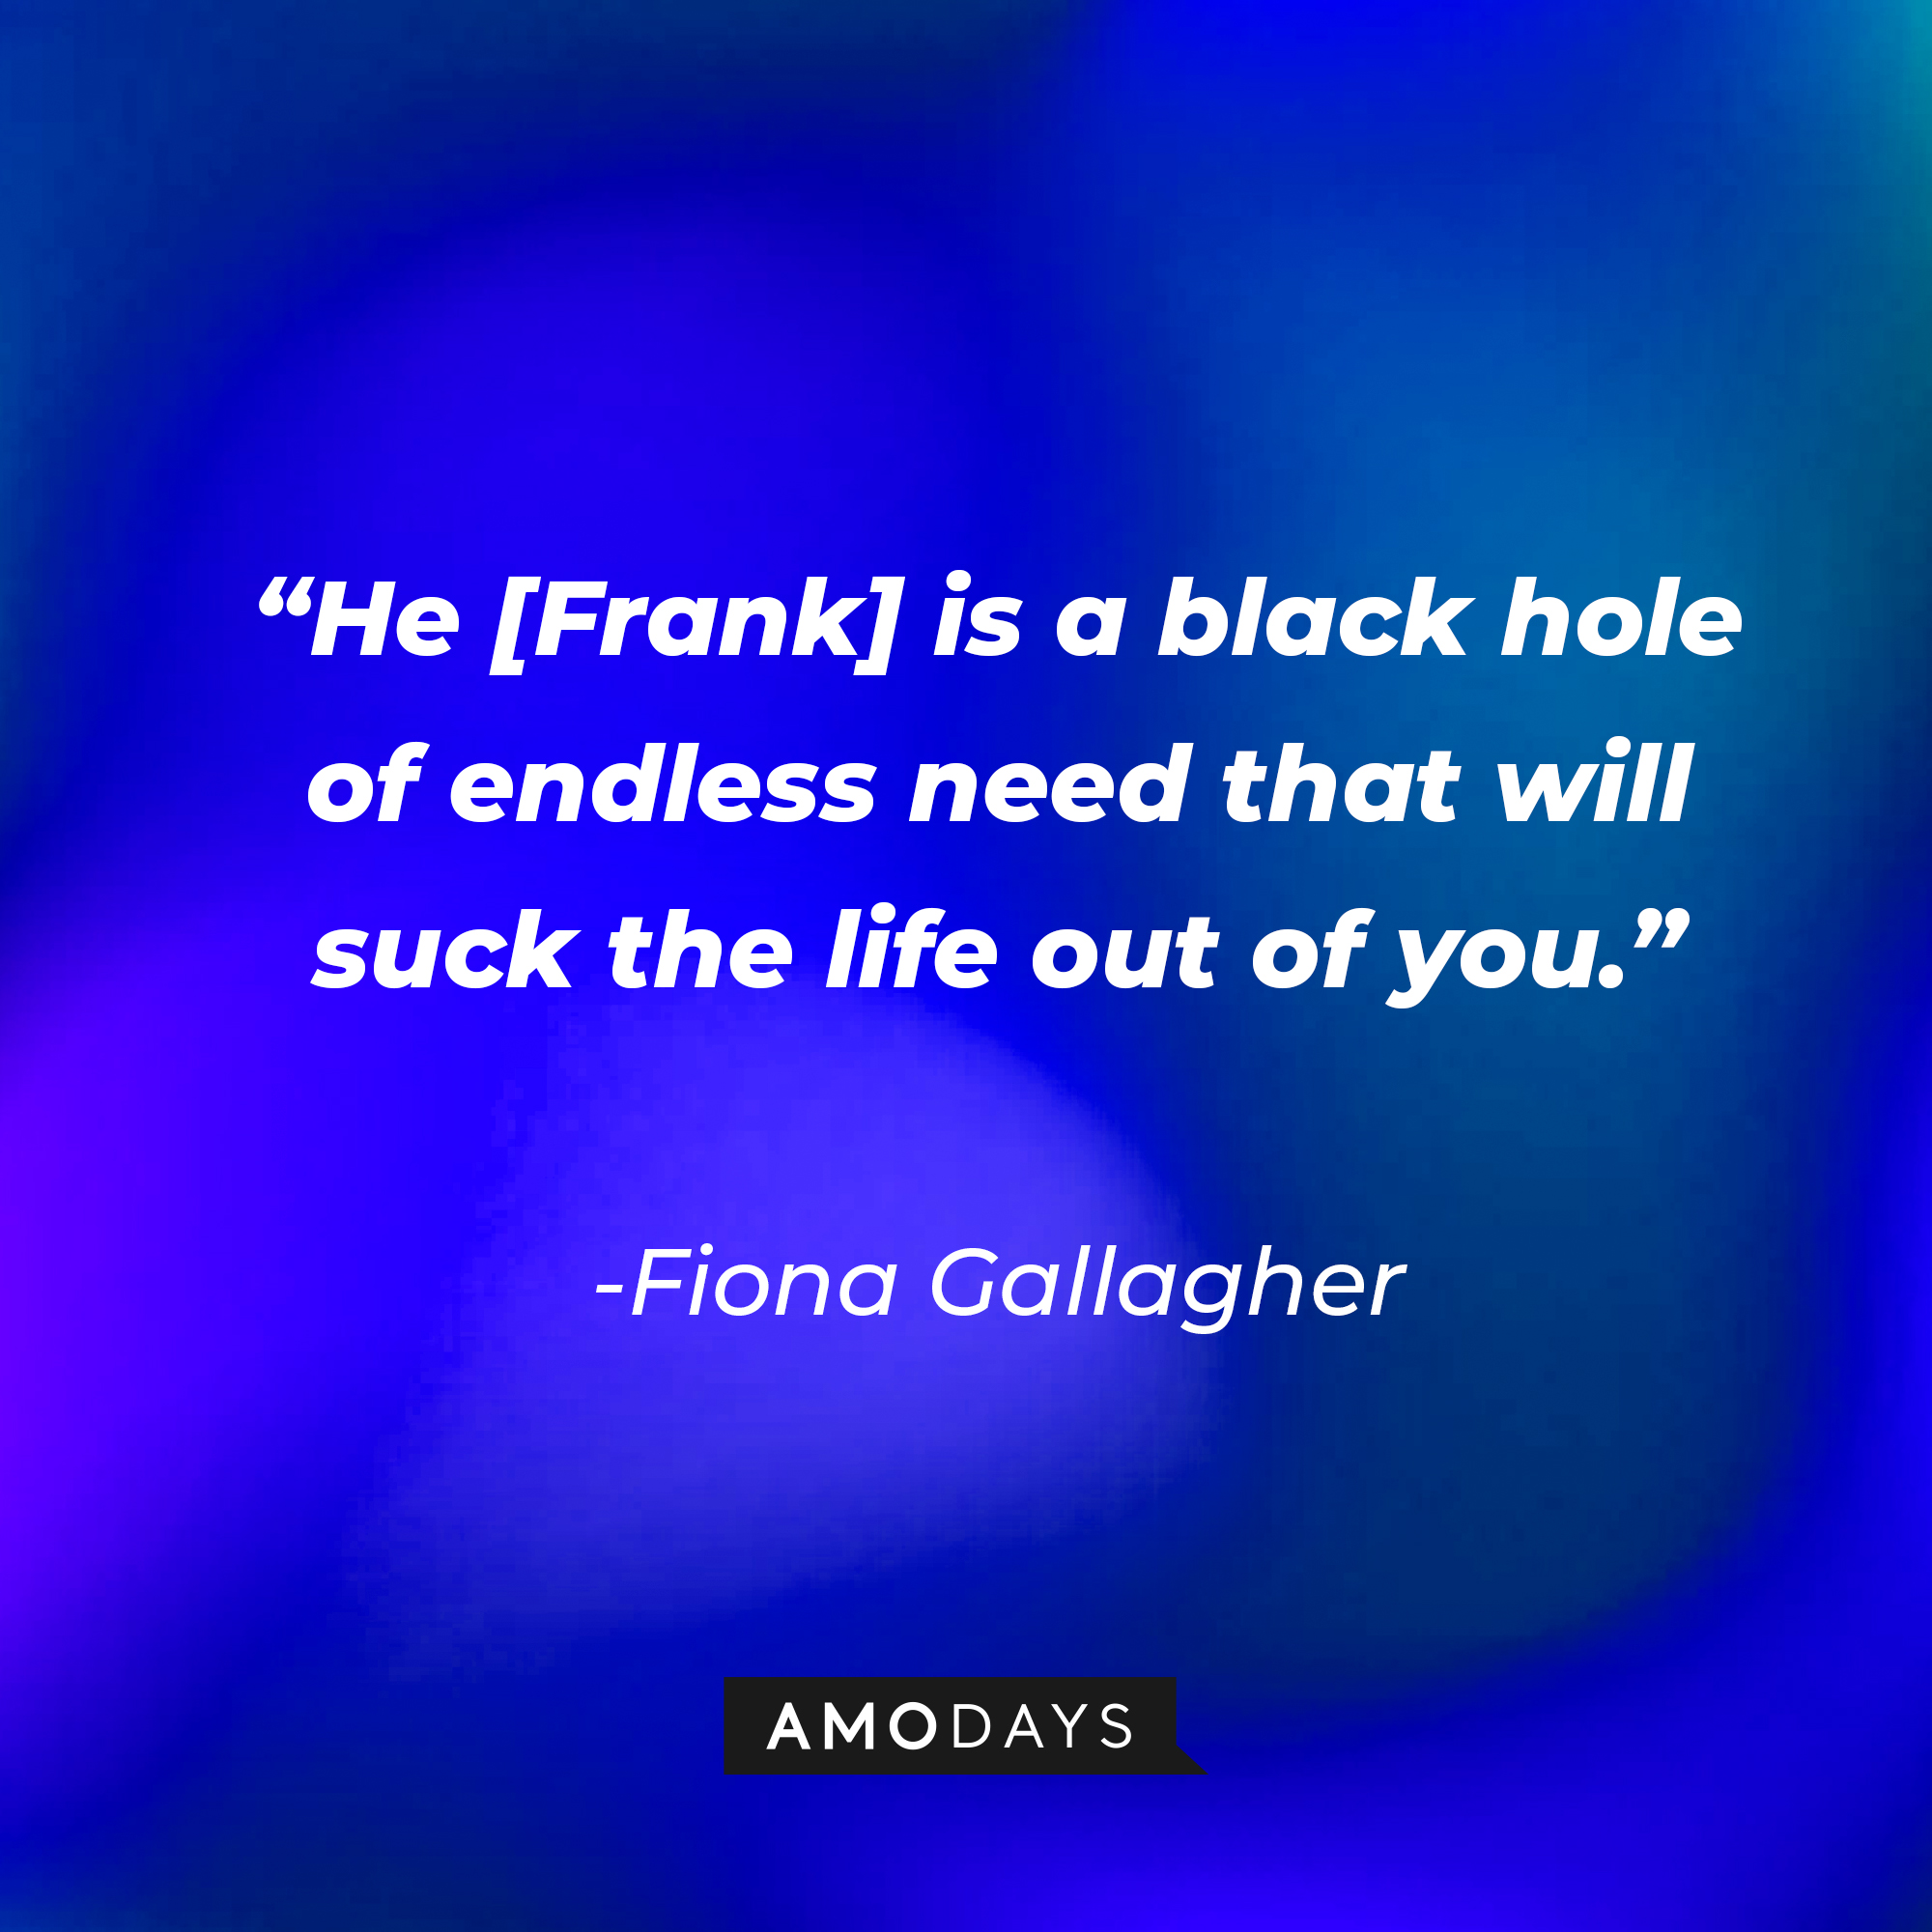 Fiona Gallagher’s quote: “He [Frank] is a black hole of endless need that will suck the life out of you.” |Source: AmoDays